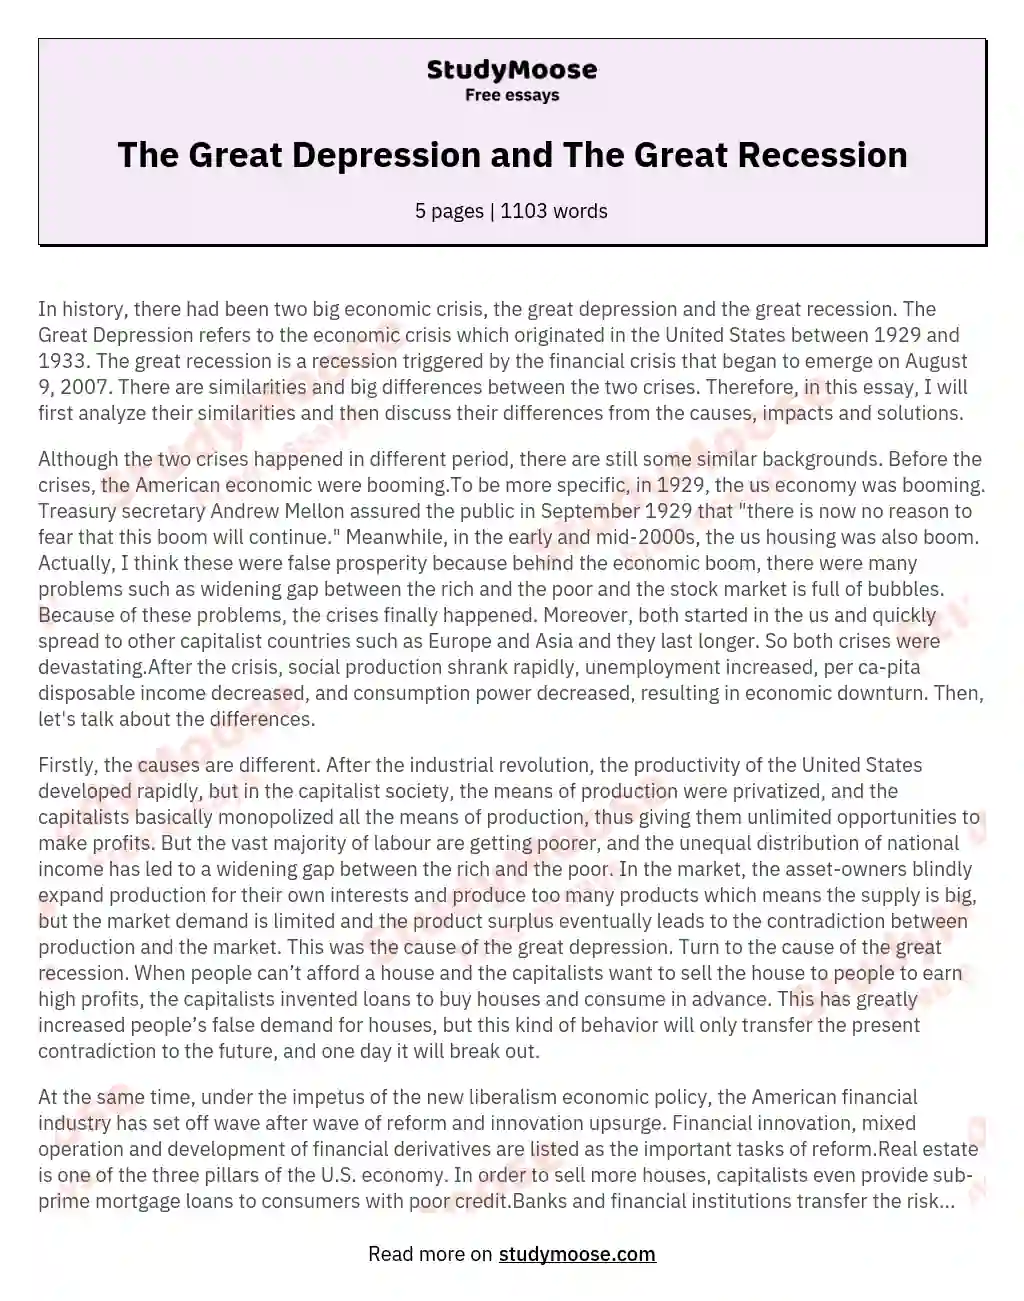 article essay about depression